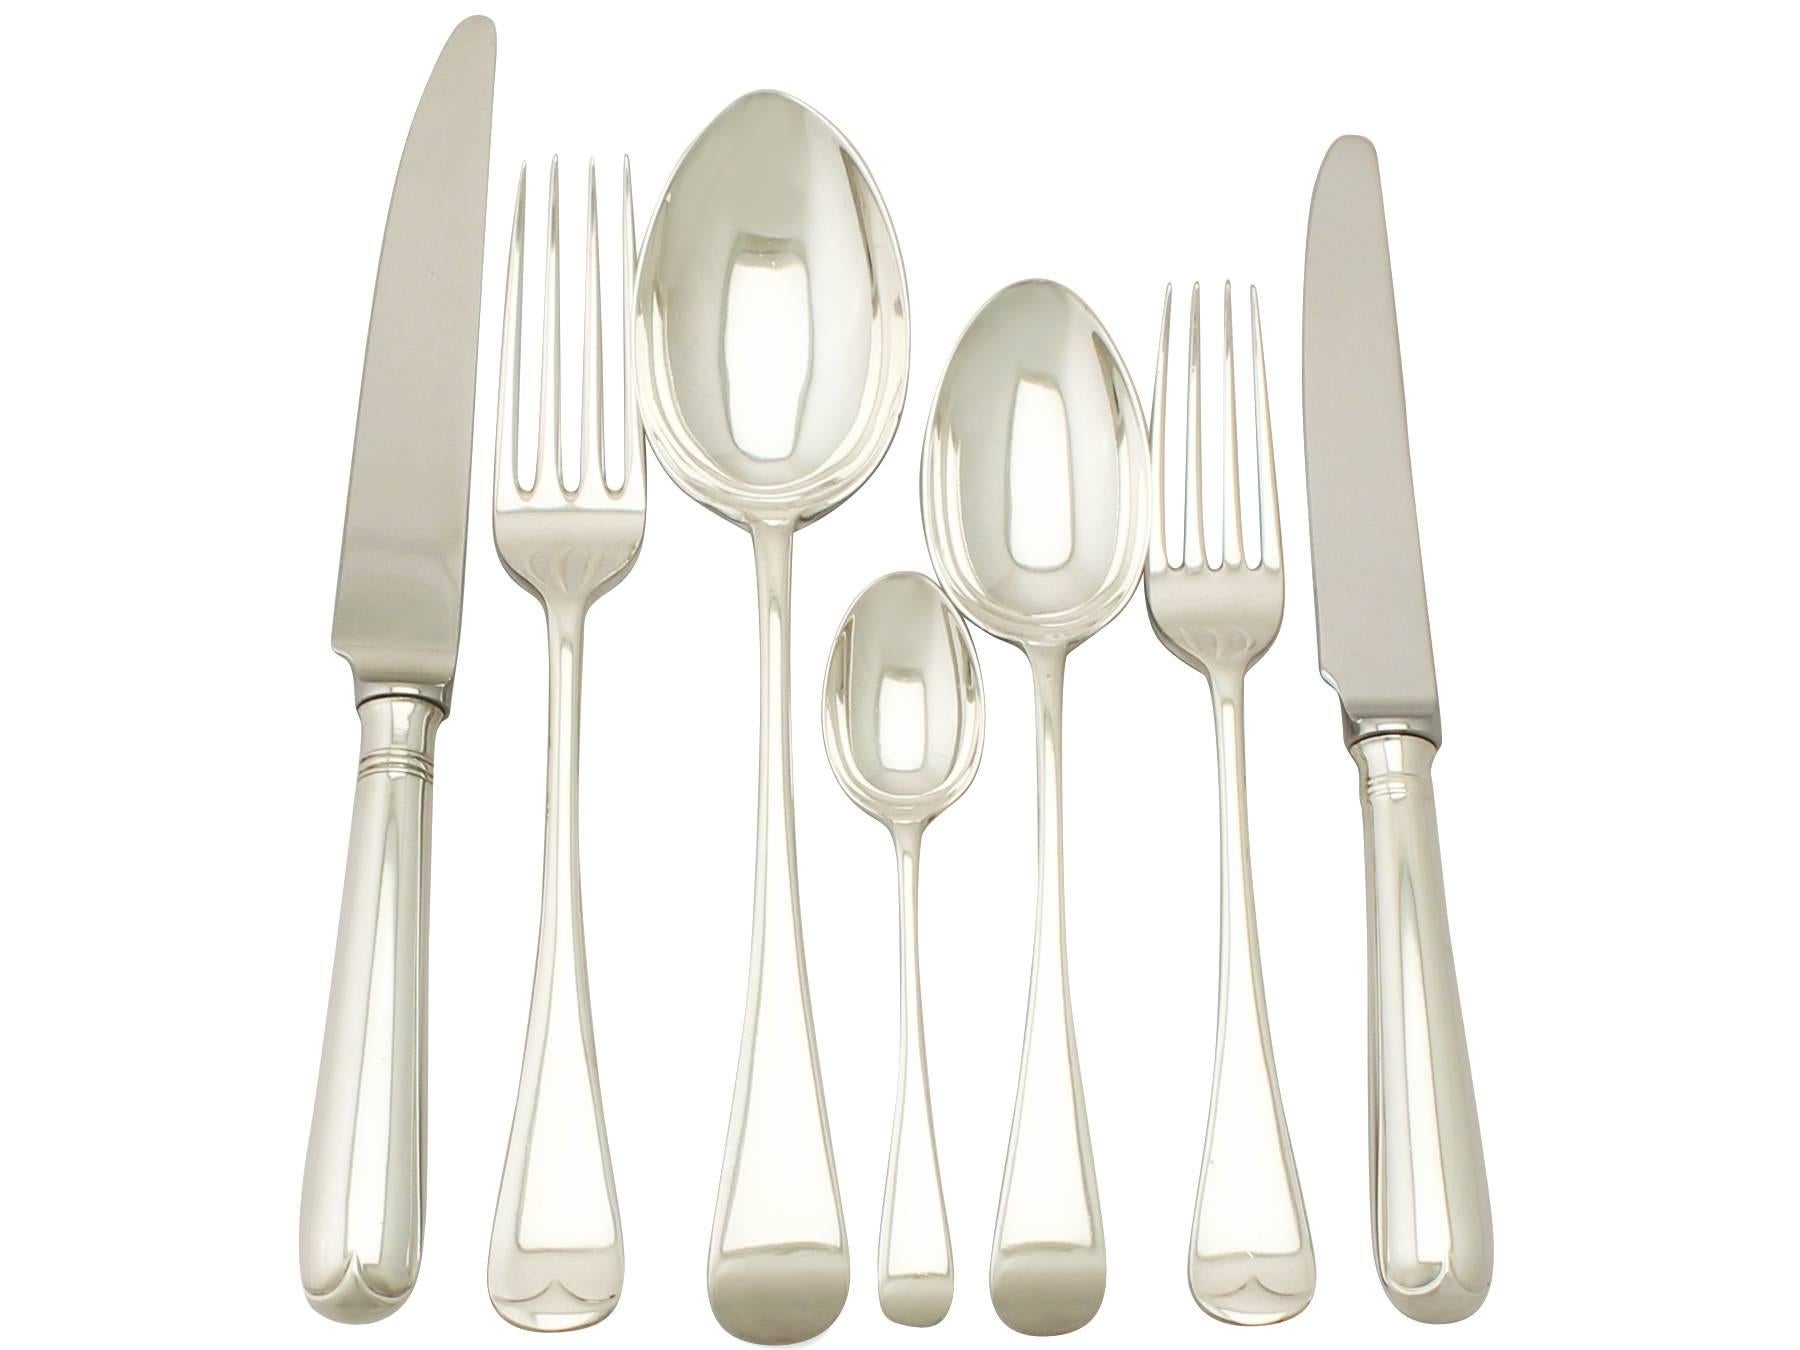 An exceptional, fine and impressive, antique George V English sterling silver straight Old English pattern flatware service for six persons; an addition to our antique silver flatware collection.

The pieces of this exceptional, straight* sterling